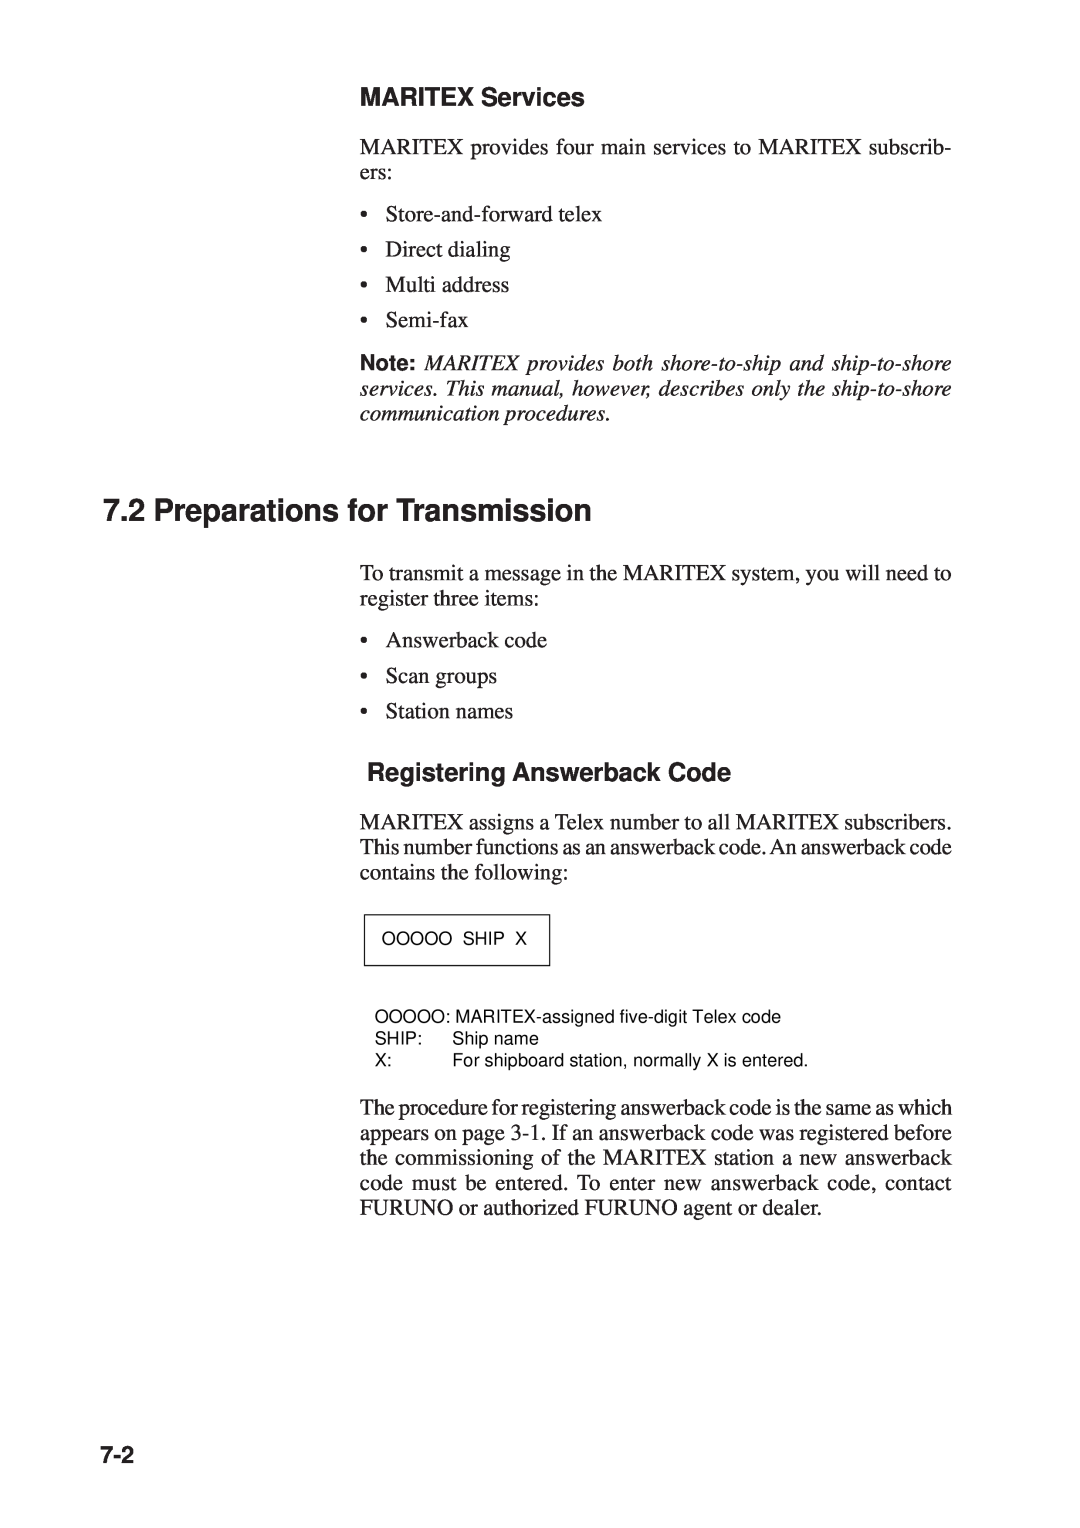 Furuno RC-1500-1T manual Preparations for Transmission, MARITEX Services, Registering Answerback Code 